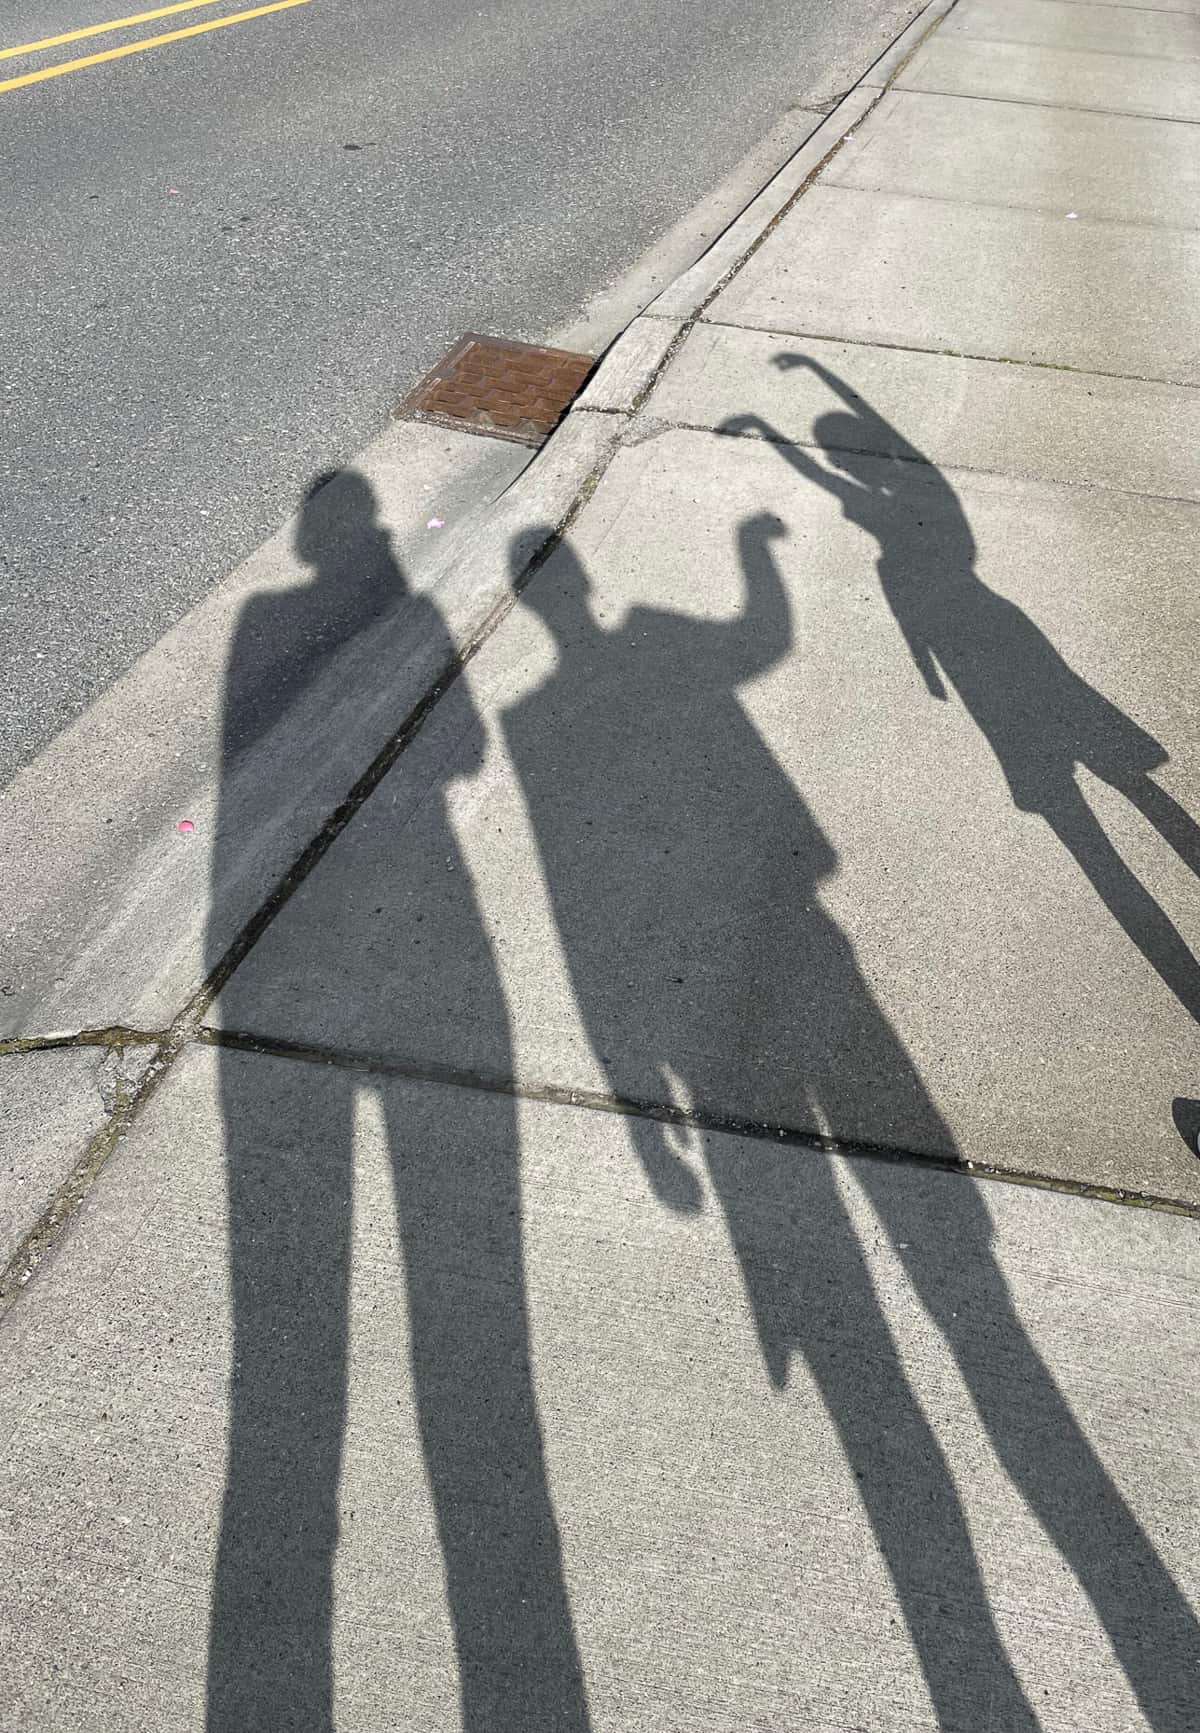 the shadows of 3 people on a sidewalk.